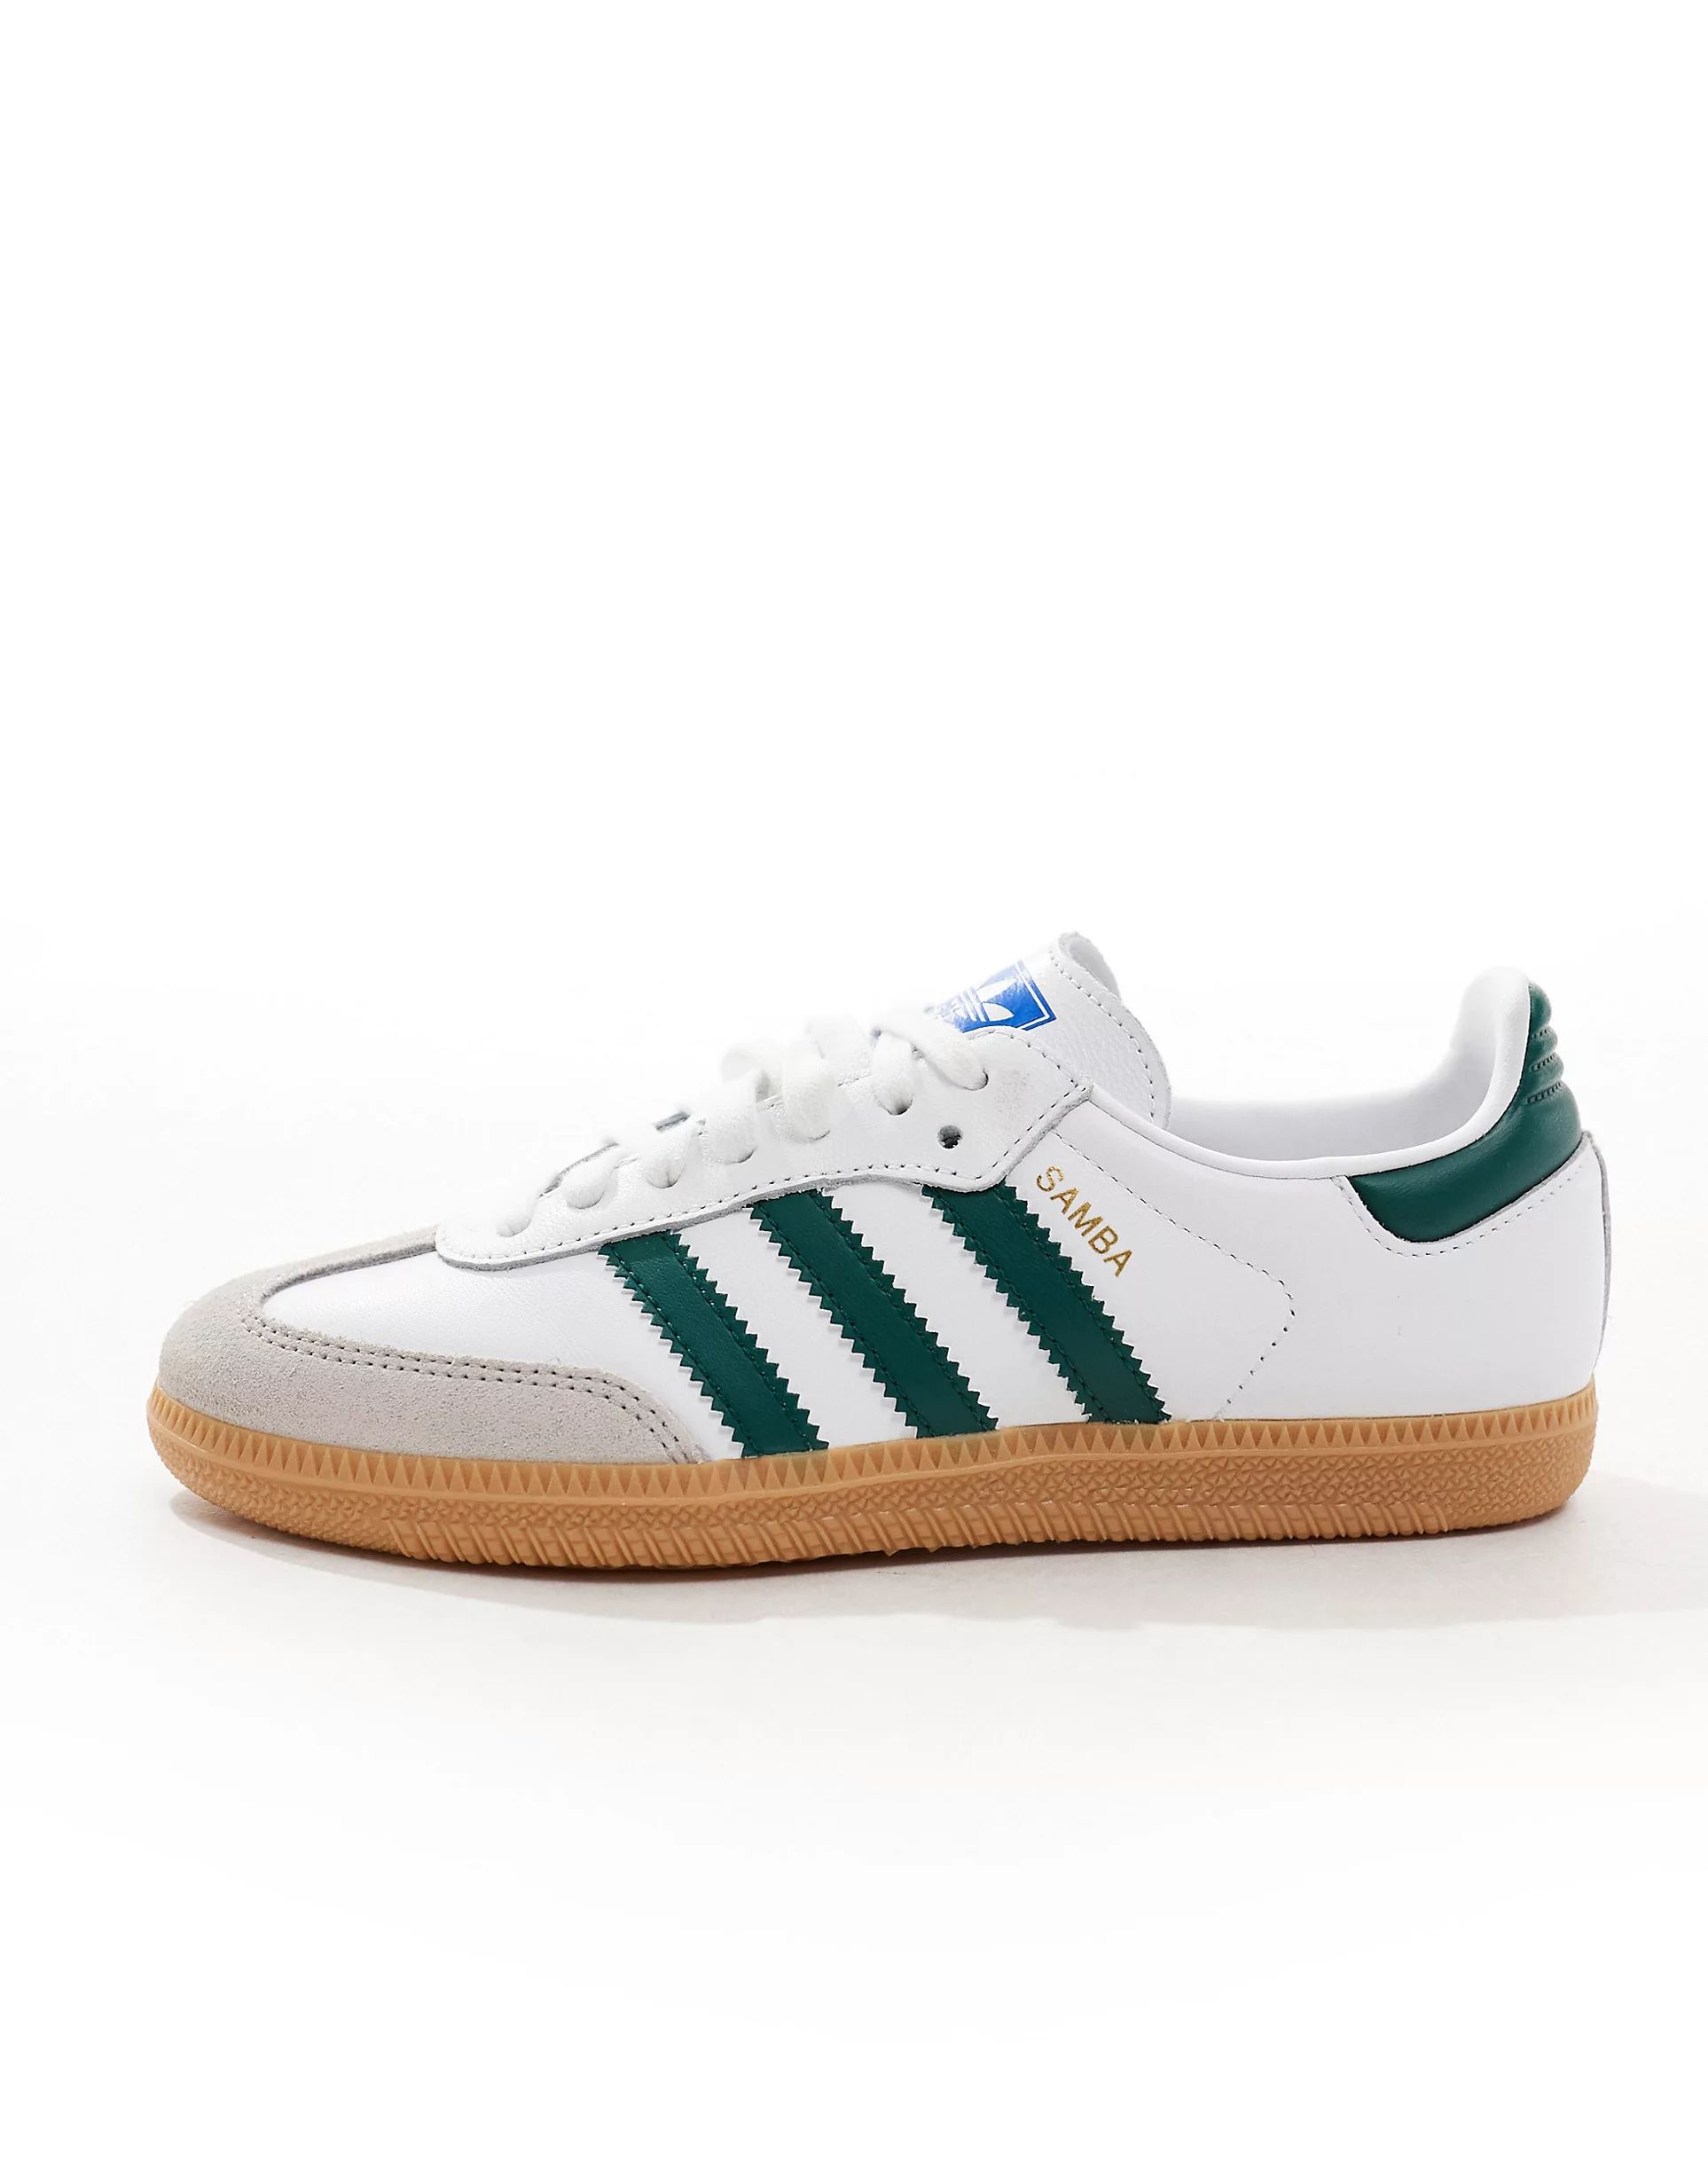 adidas Originals Samba OG trainers in white and green | ASOS (Global)